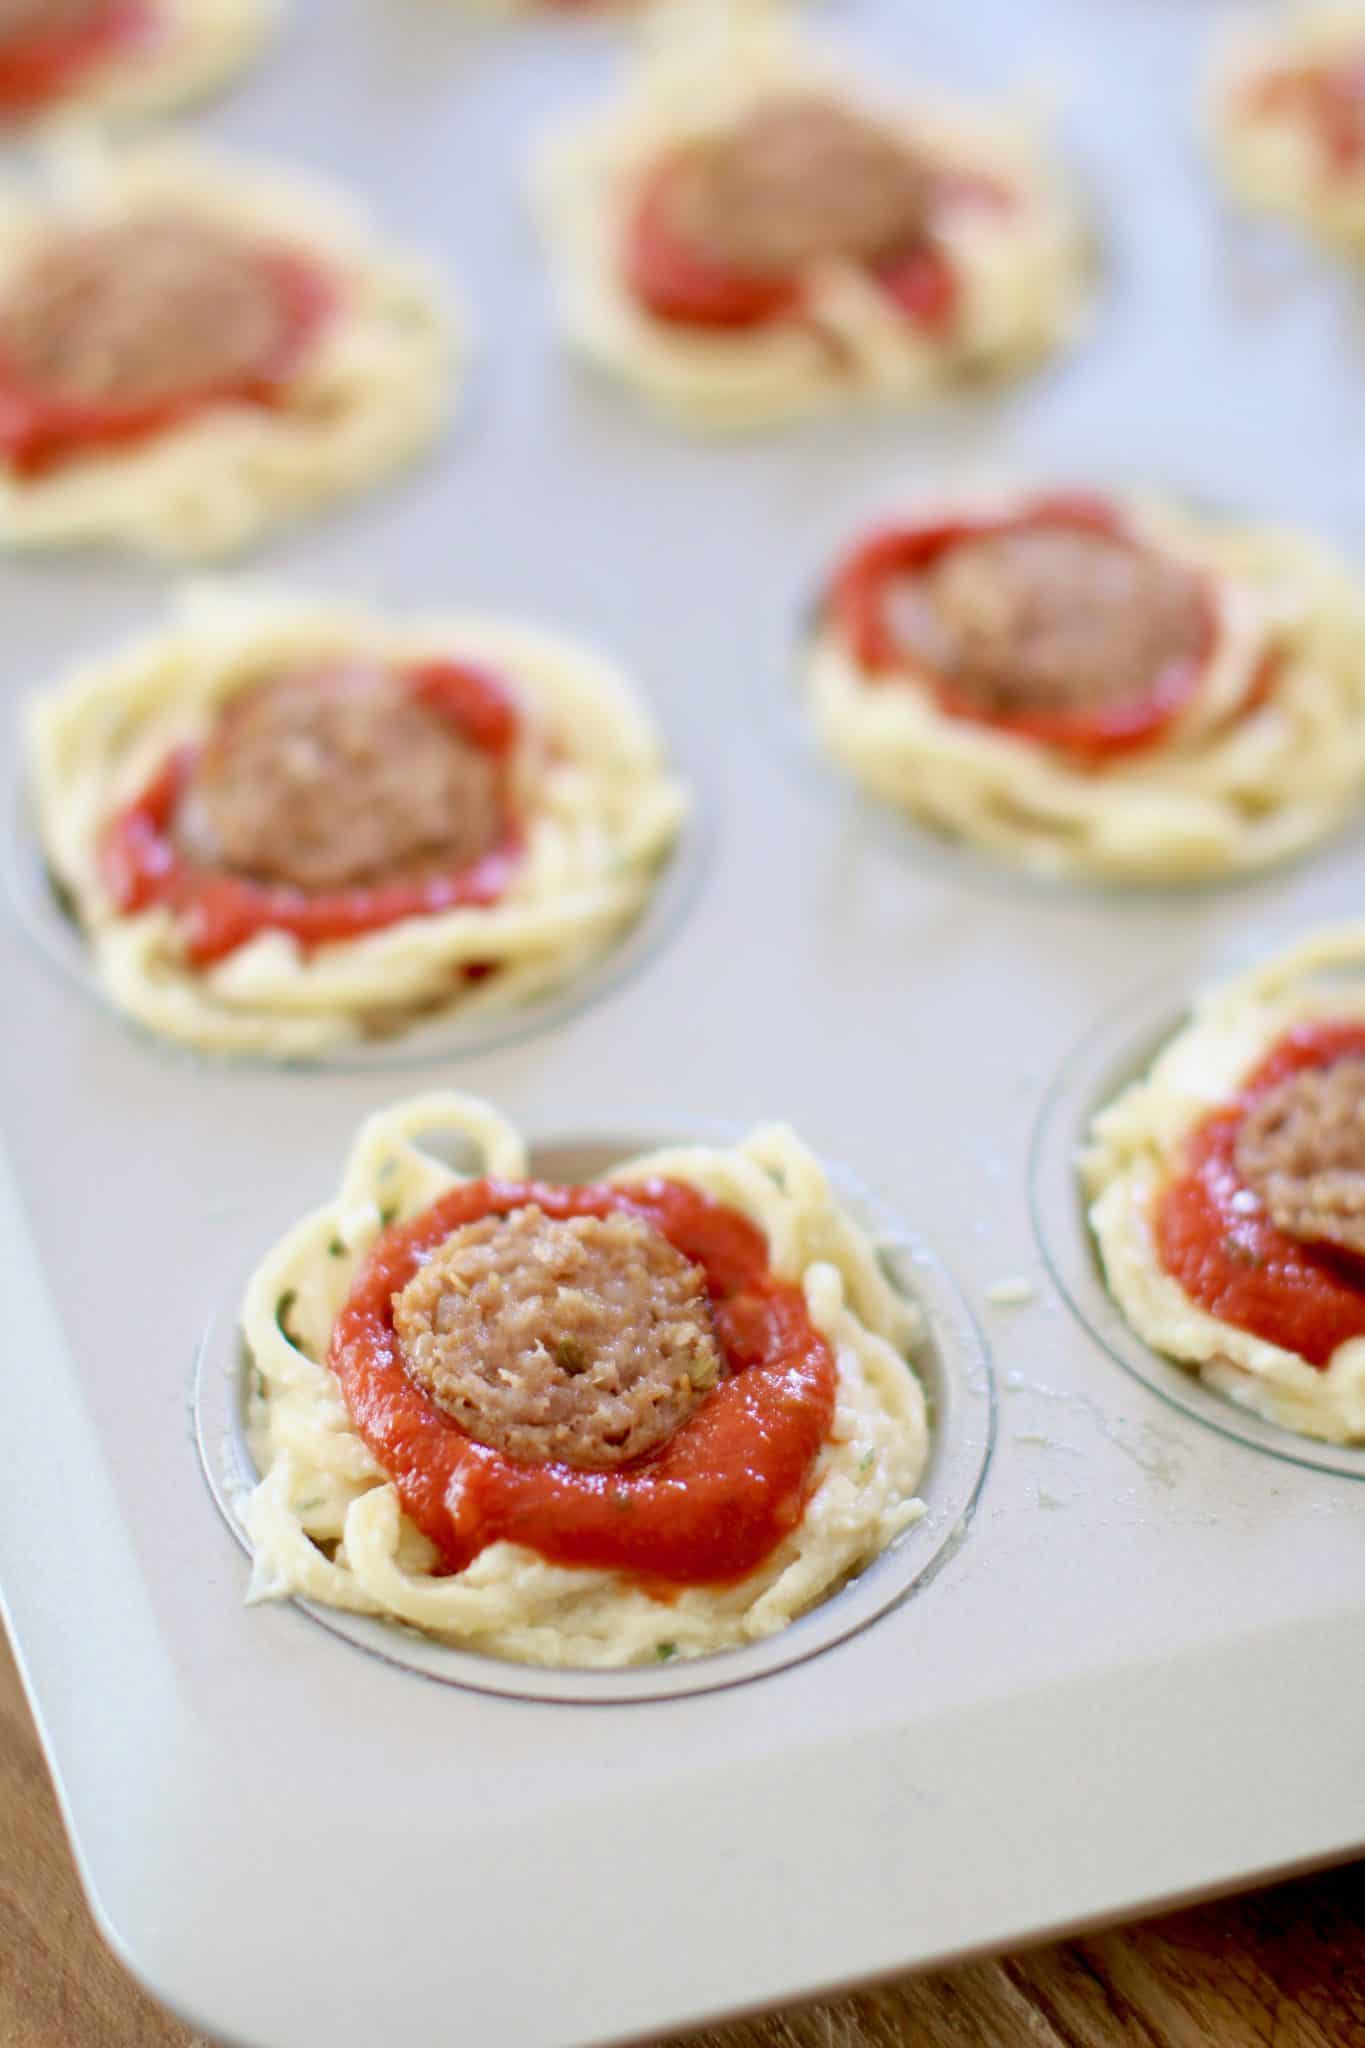 spaghetti nests, spaghetti sauce and sliced sausage in a muffin pan (before baking).